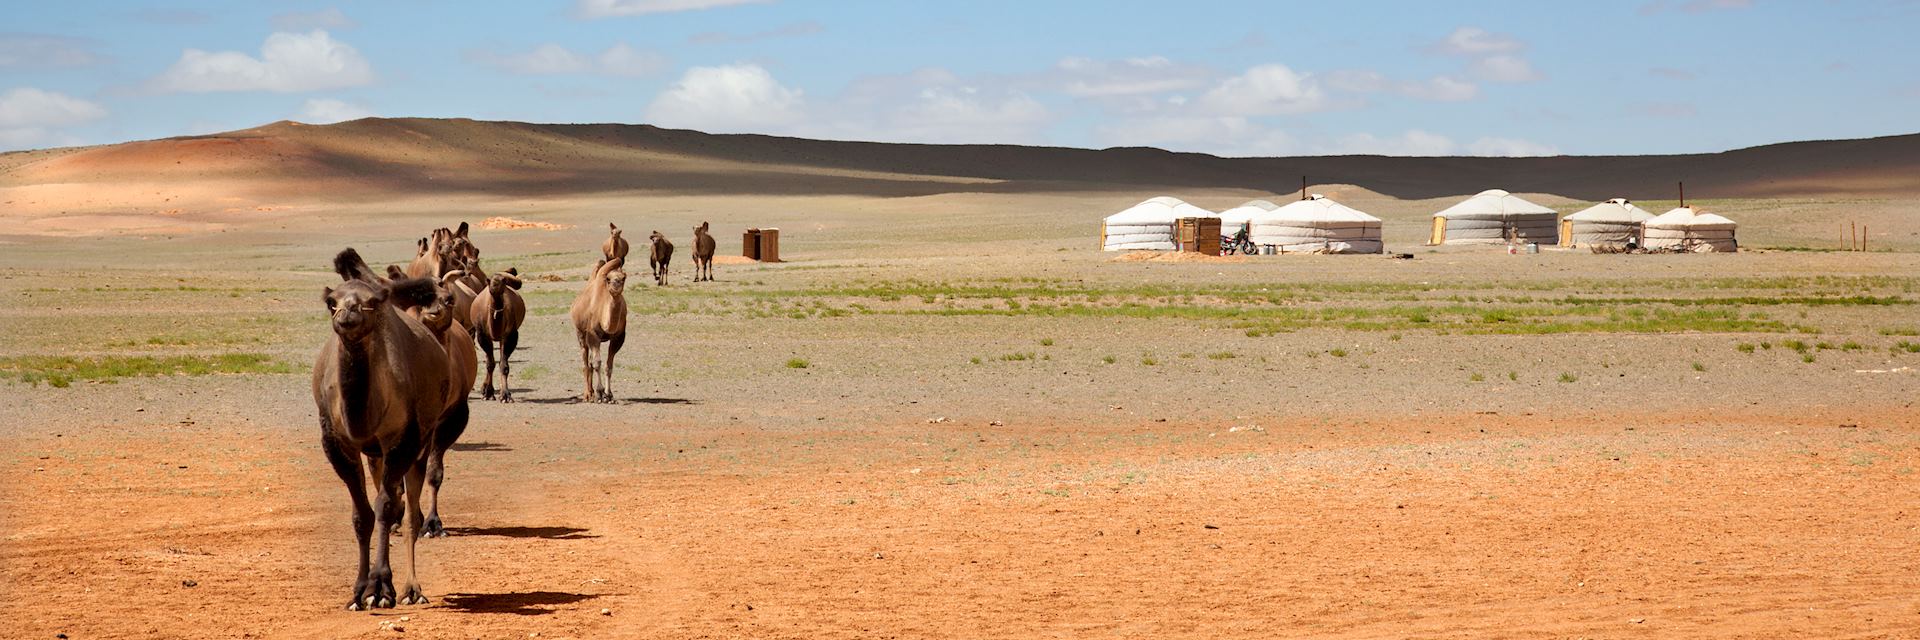 Camels and yurts in the Gobi Desert, Mongolia